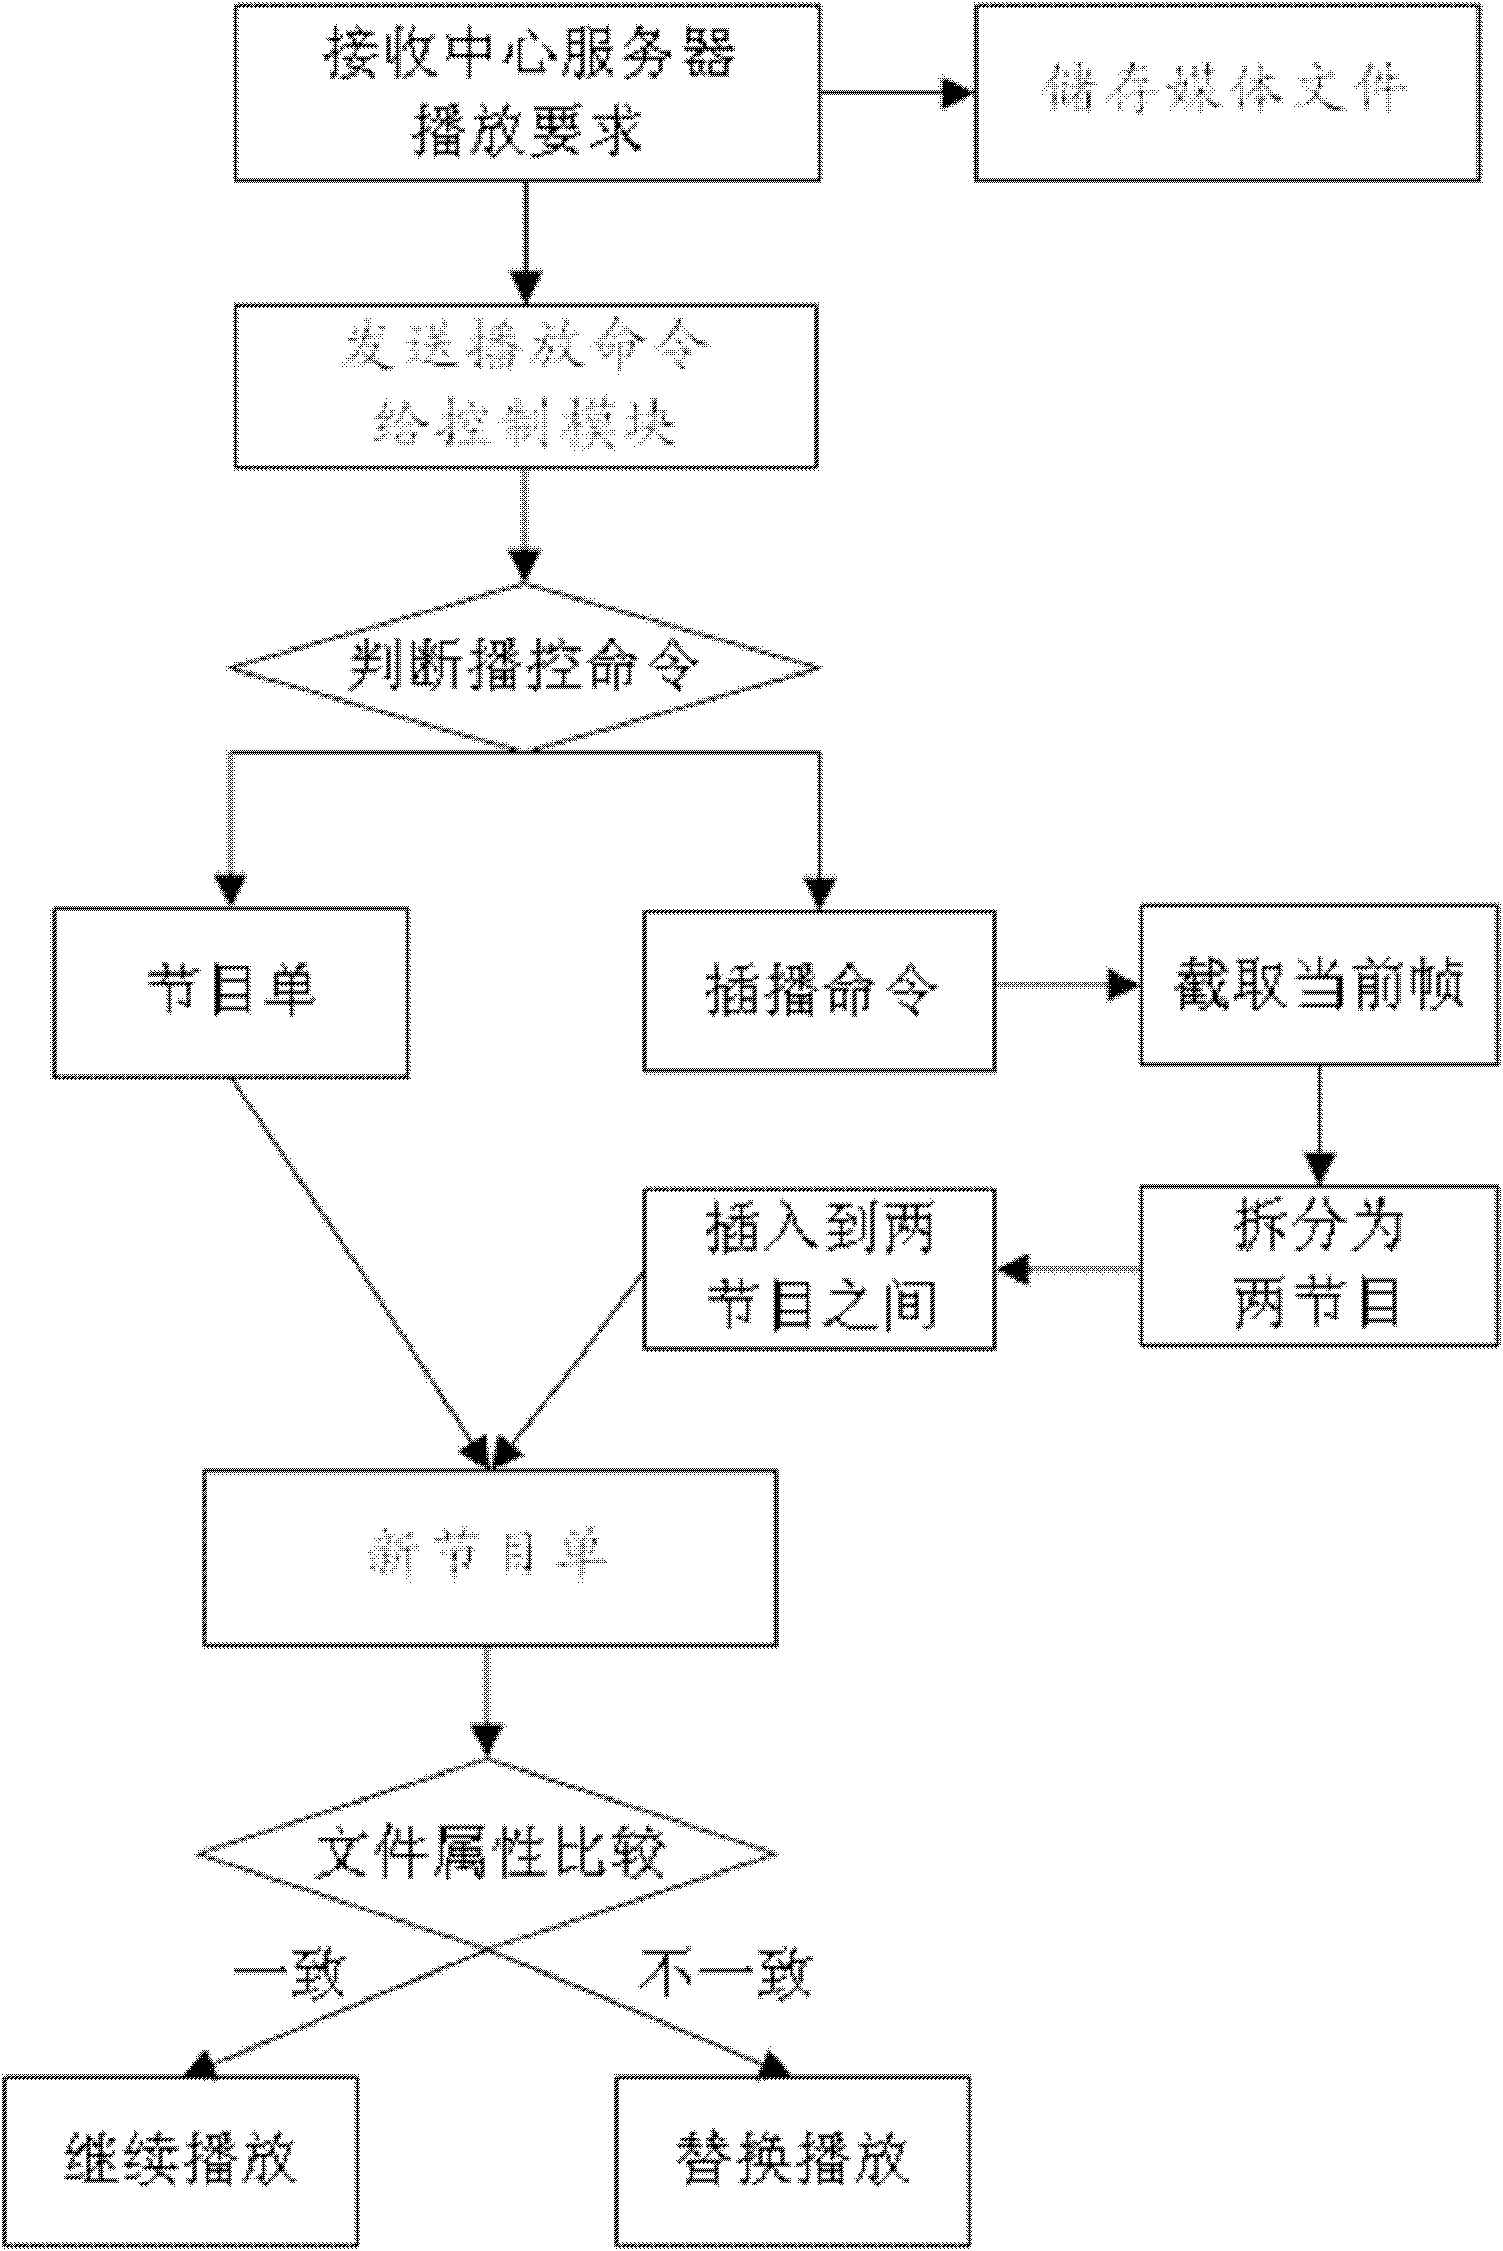 Remote broadcast control method and system thereof